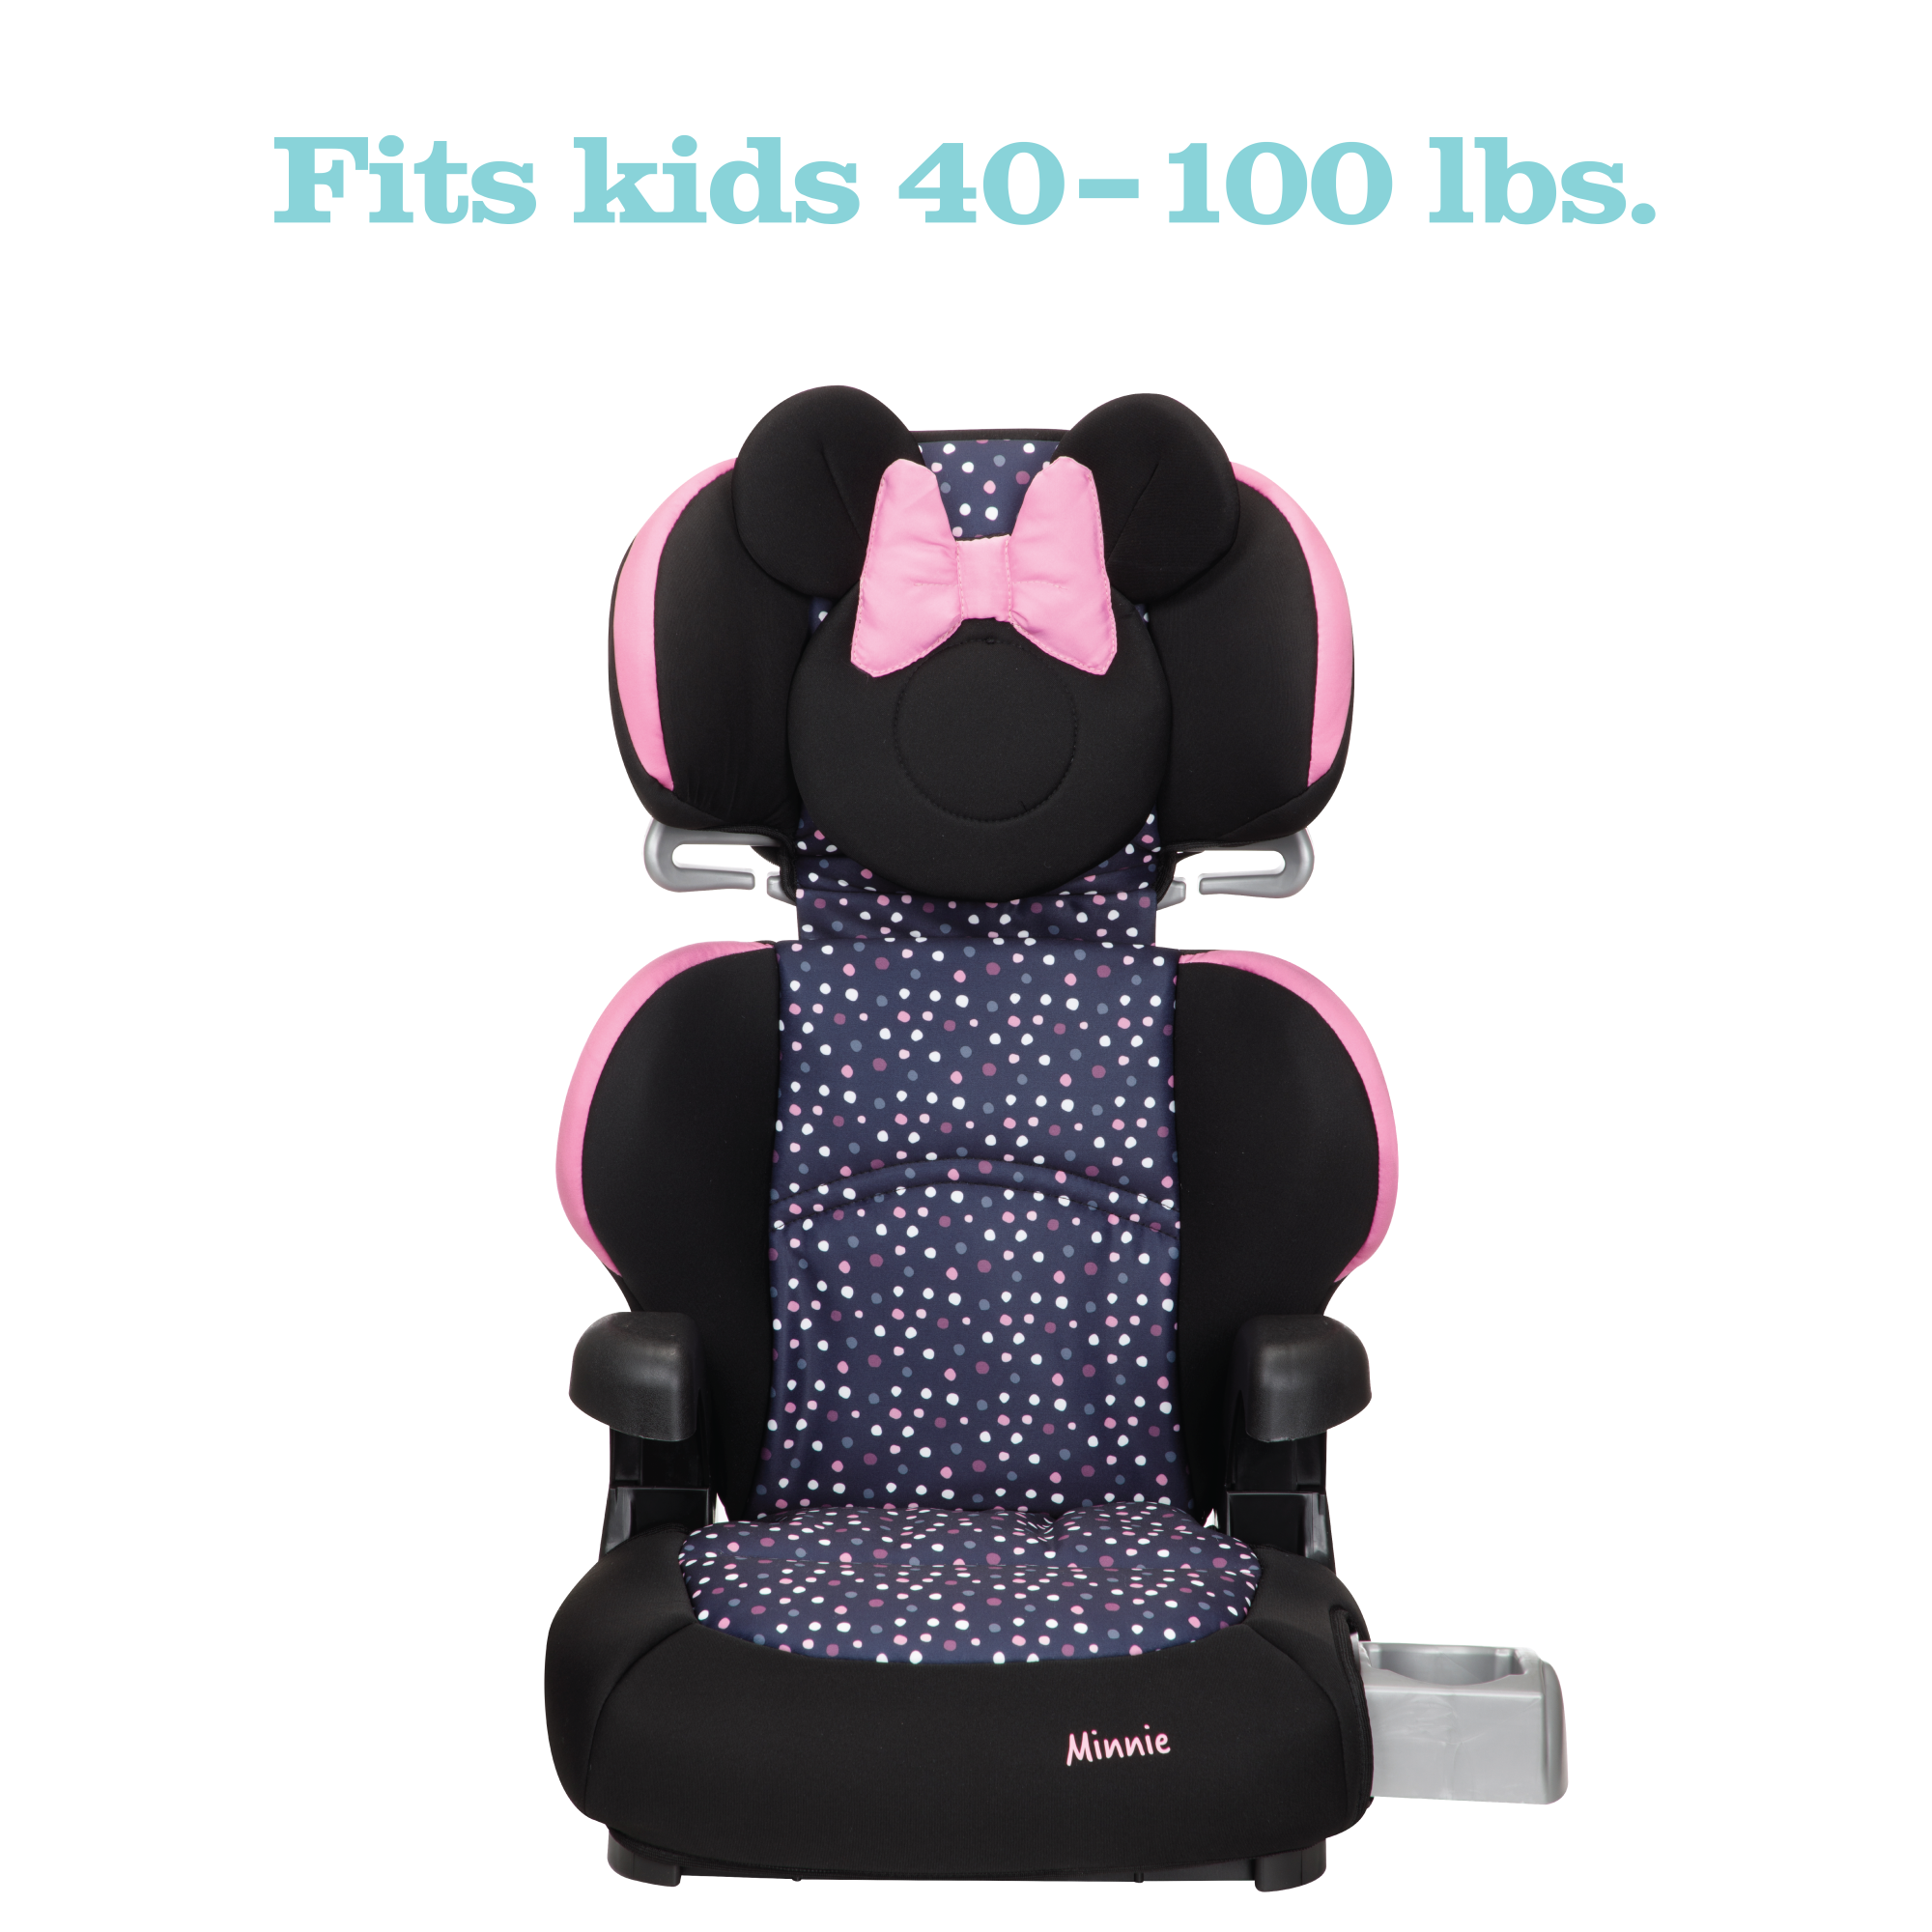 Disney Baby Pronto!™ Belt-Positioning Booster Car Seat - Minnie Dot Party - fits kids 40-100 lbs.